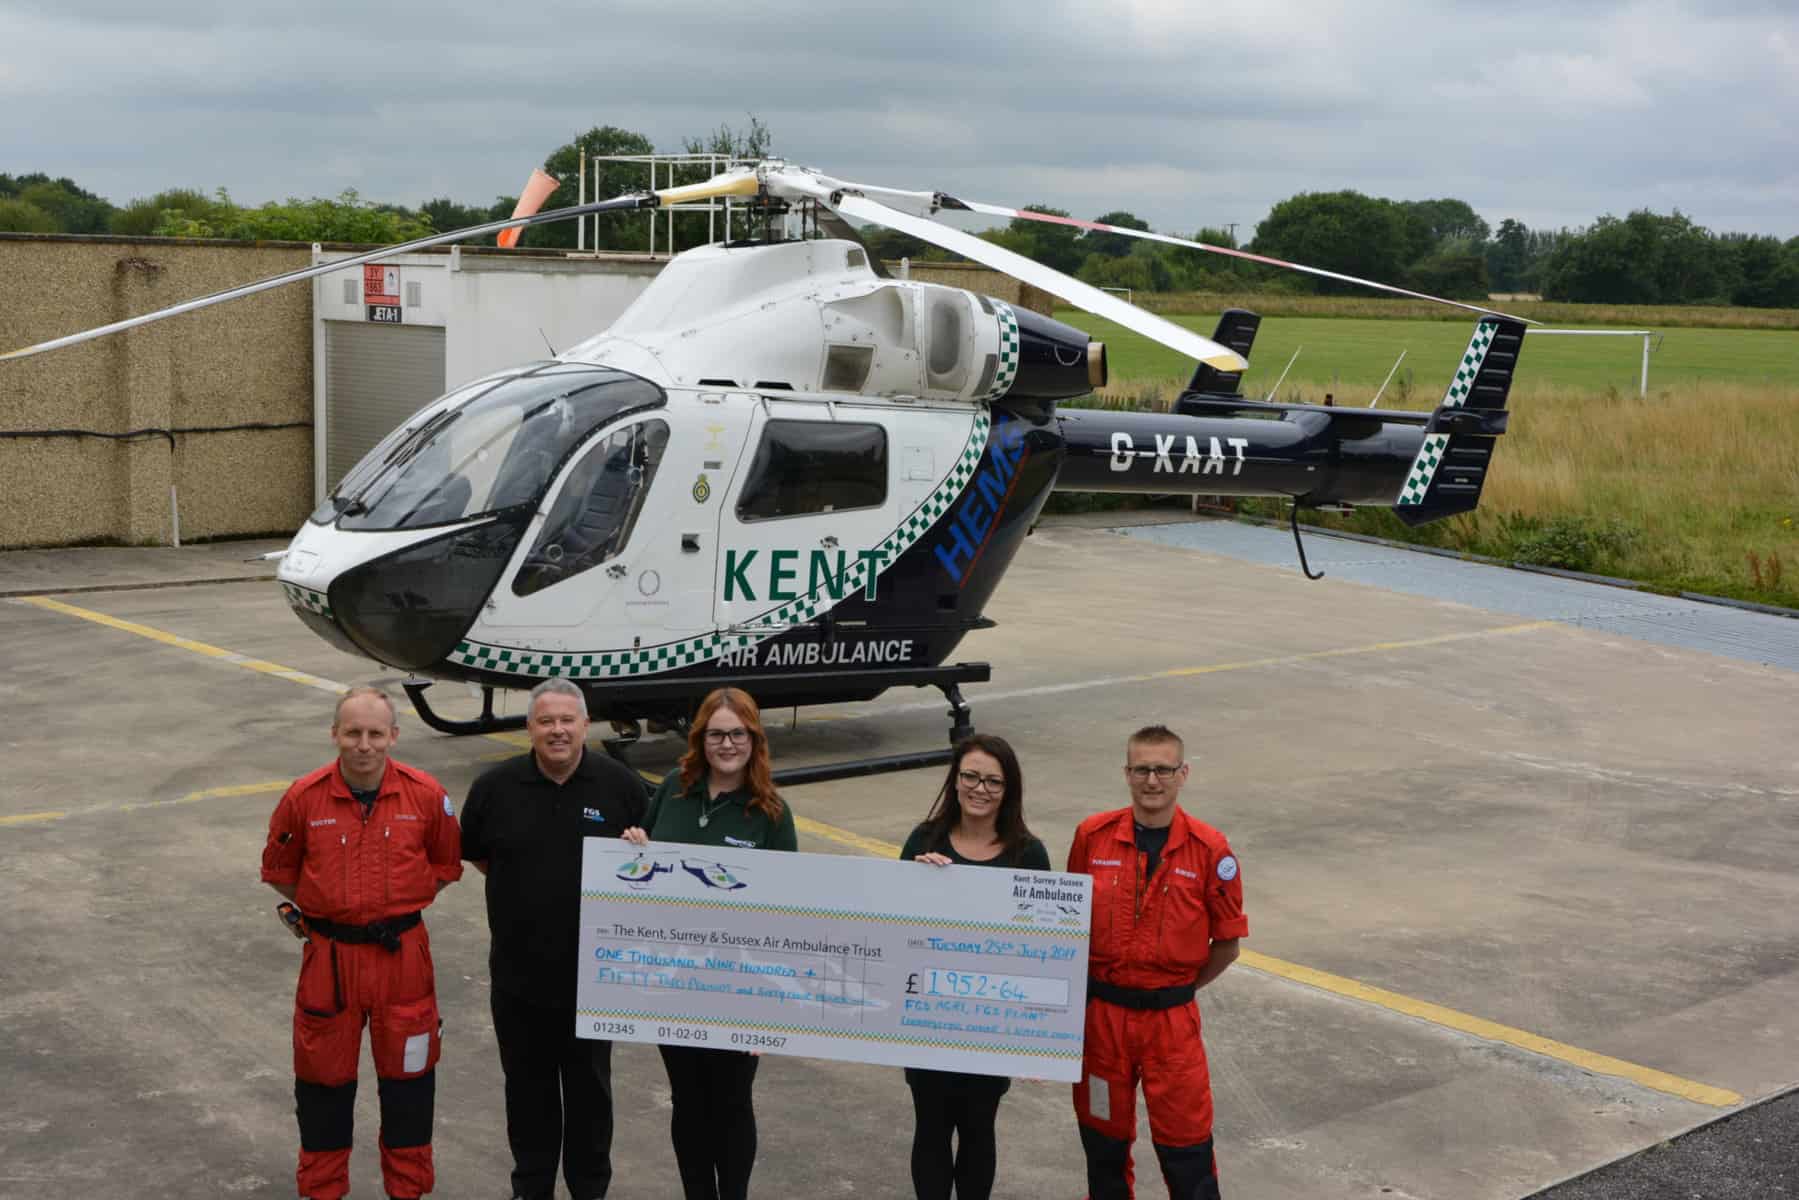 Continued Support for the Kent, Surrey & Sussex Air Ambulance